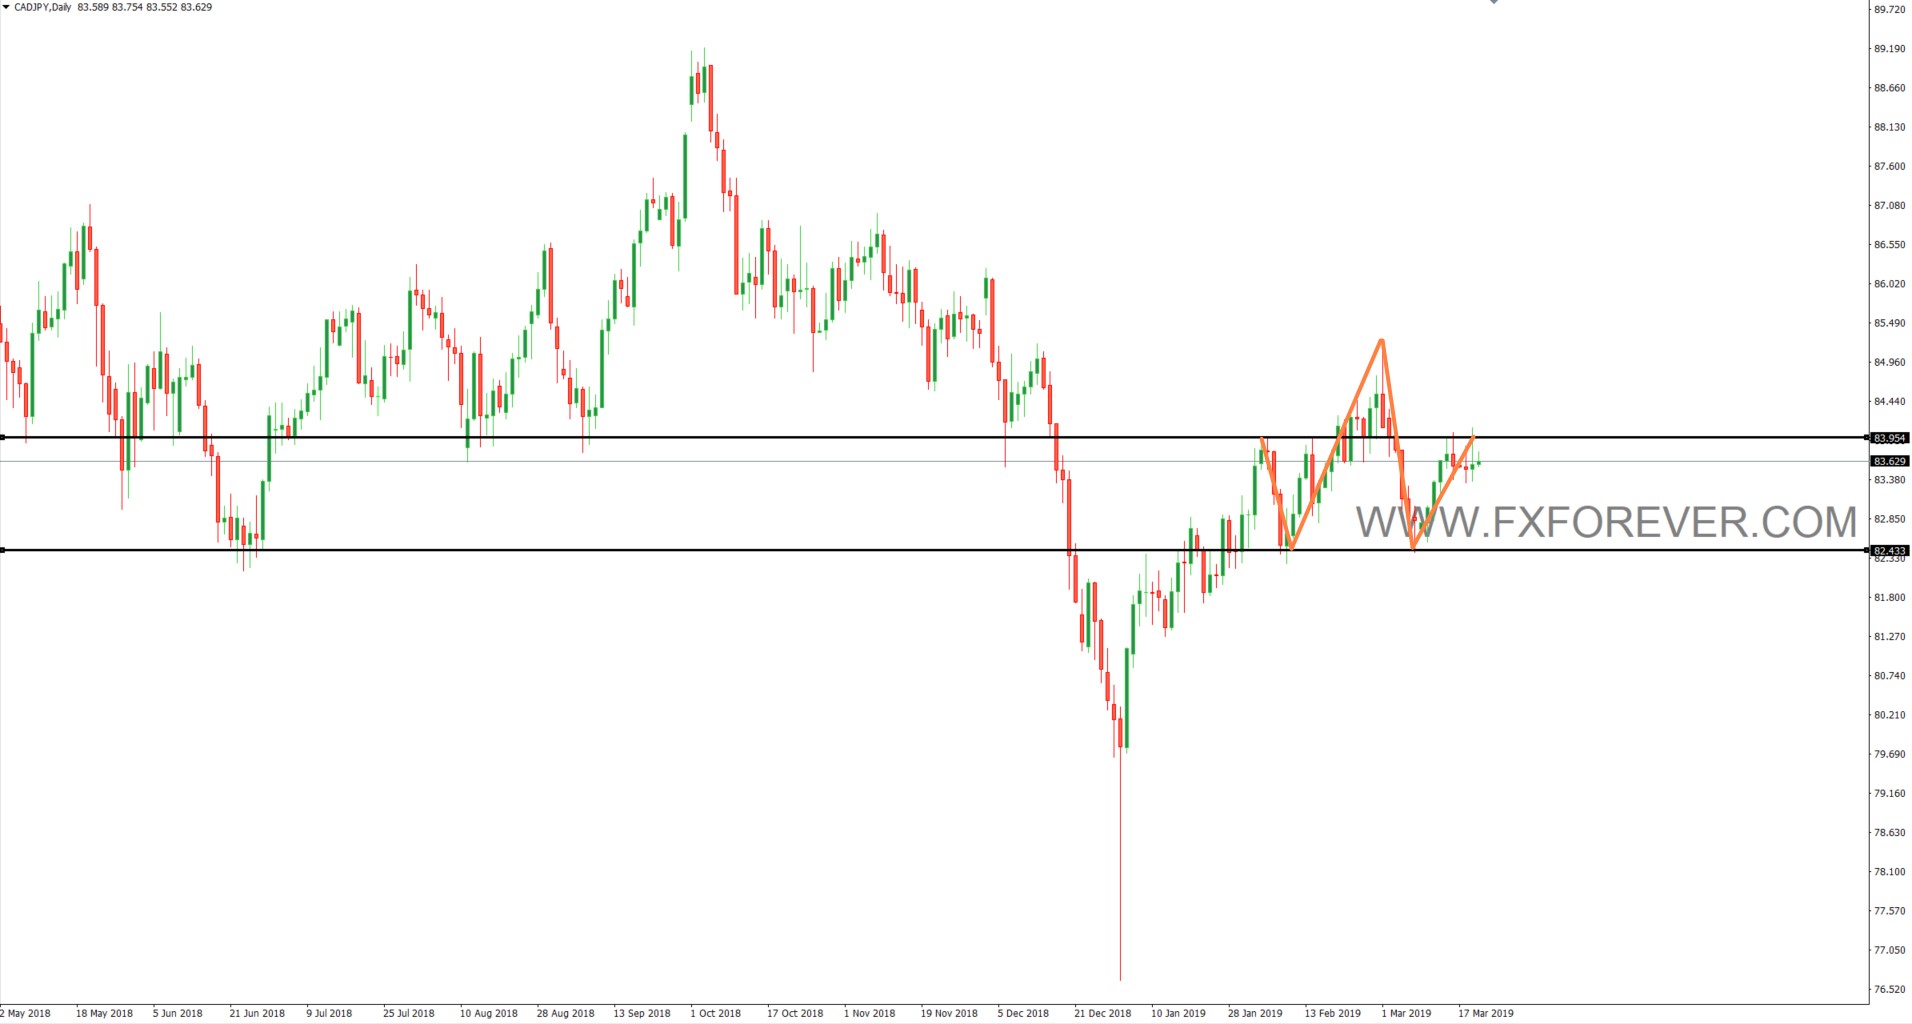 Cad Jpy Live Chart